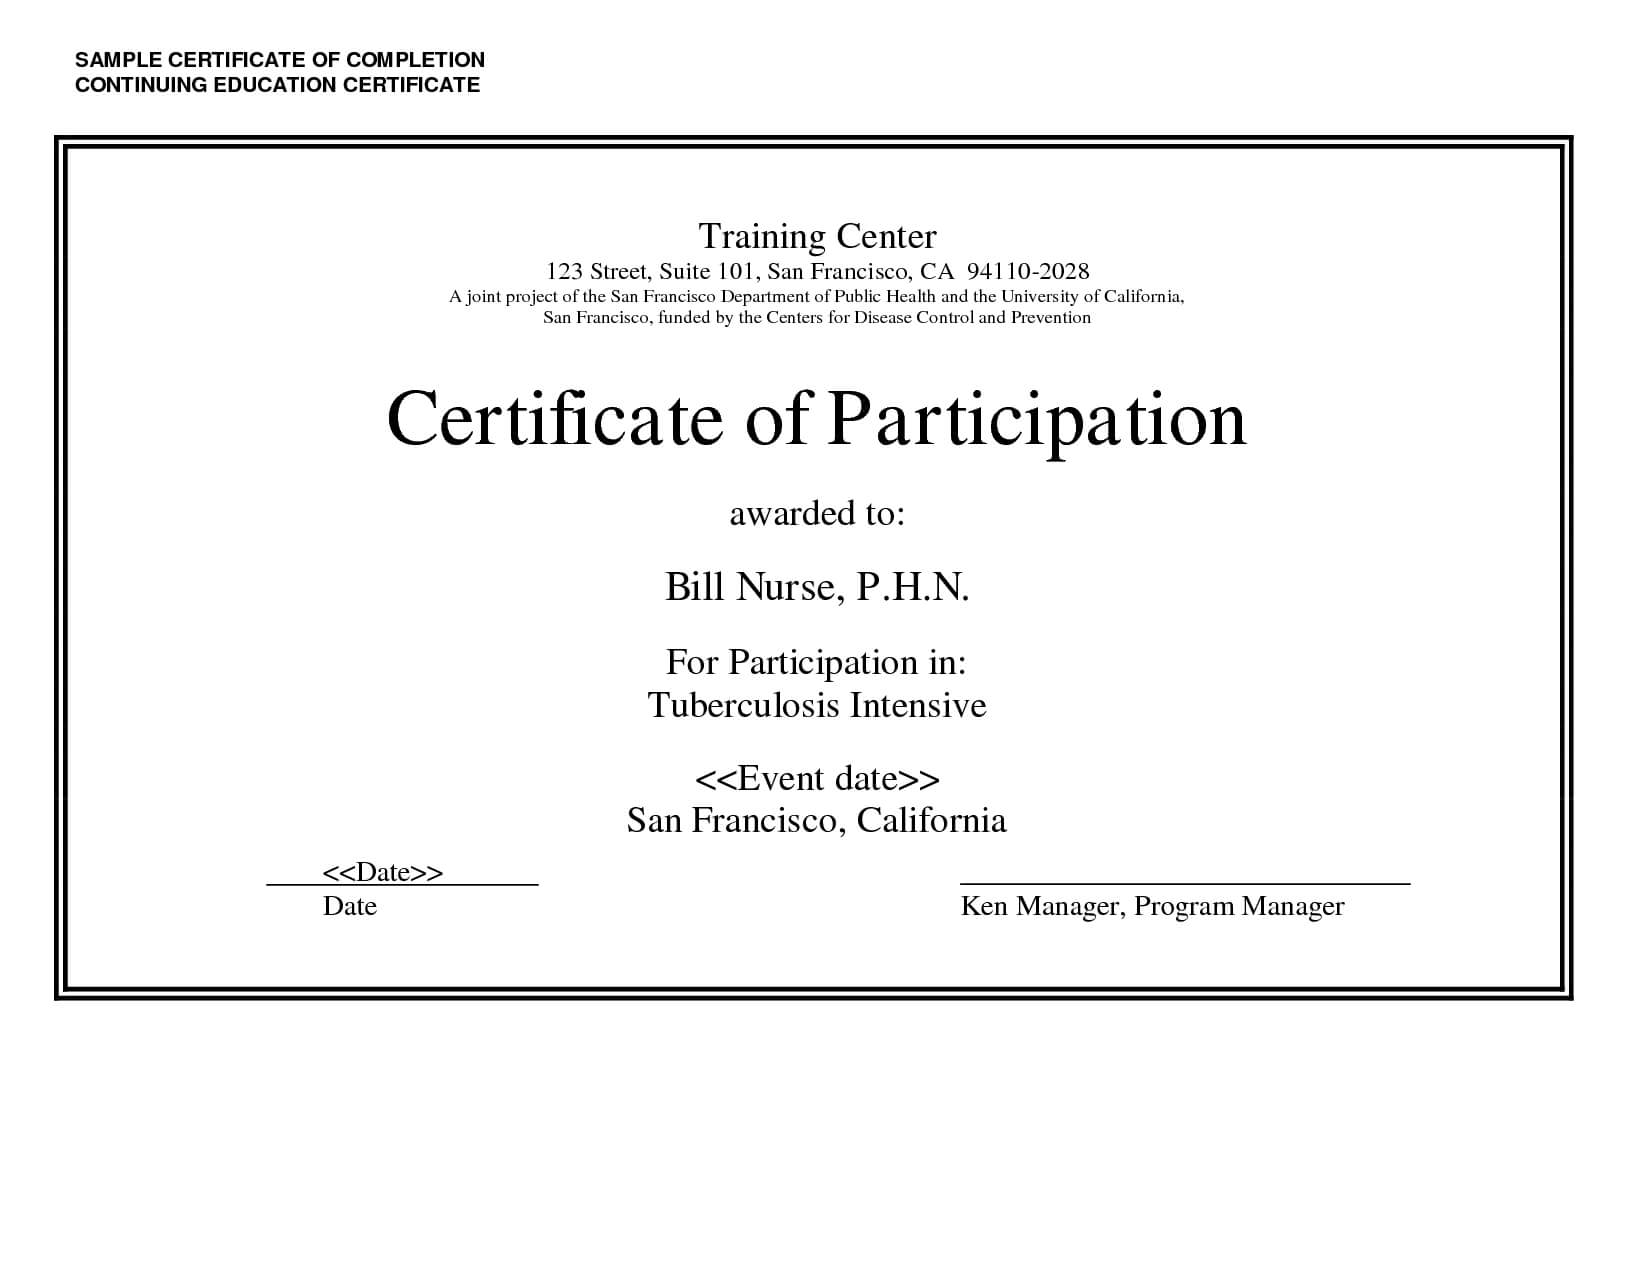 Certificate Template Continuing Education | Example Resume With Regard To Continuing Education Certificate Template